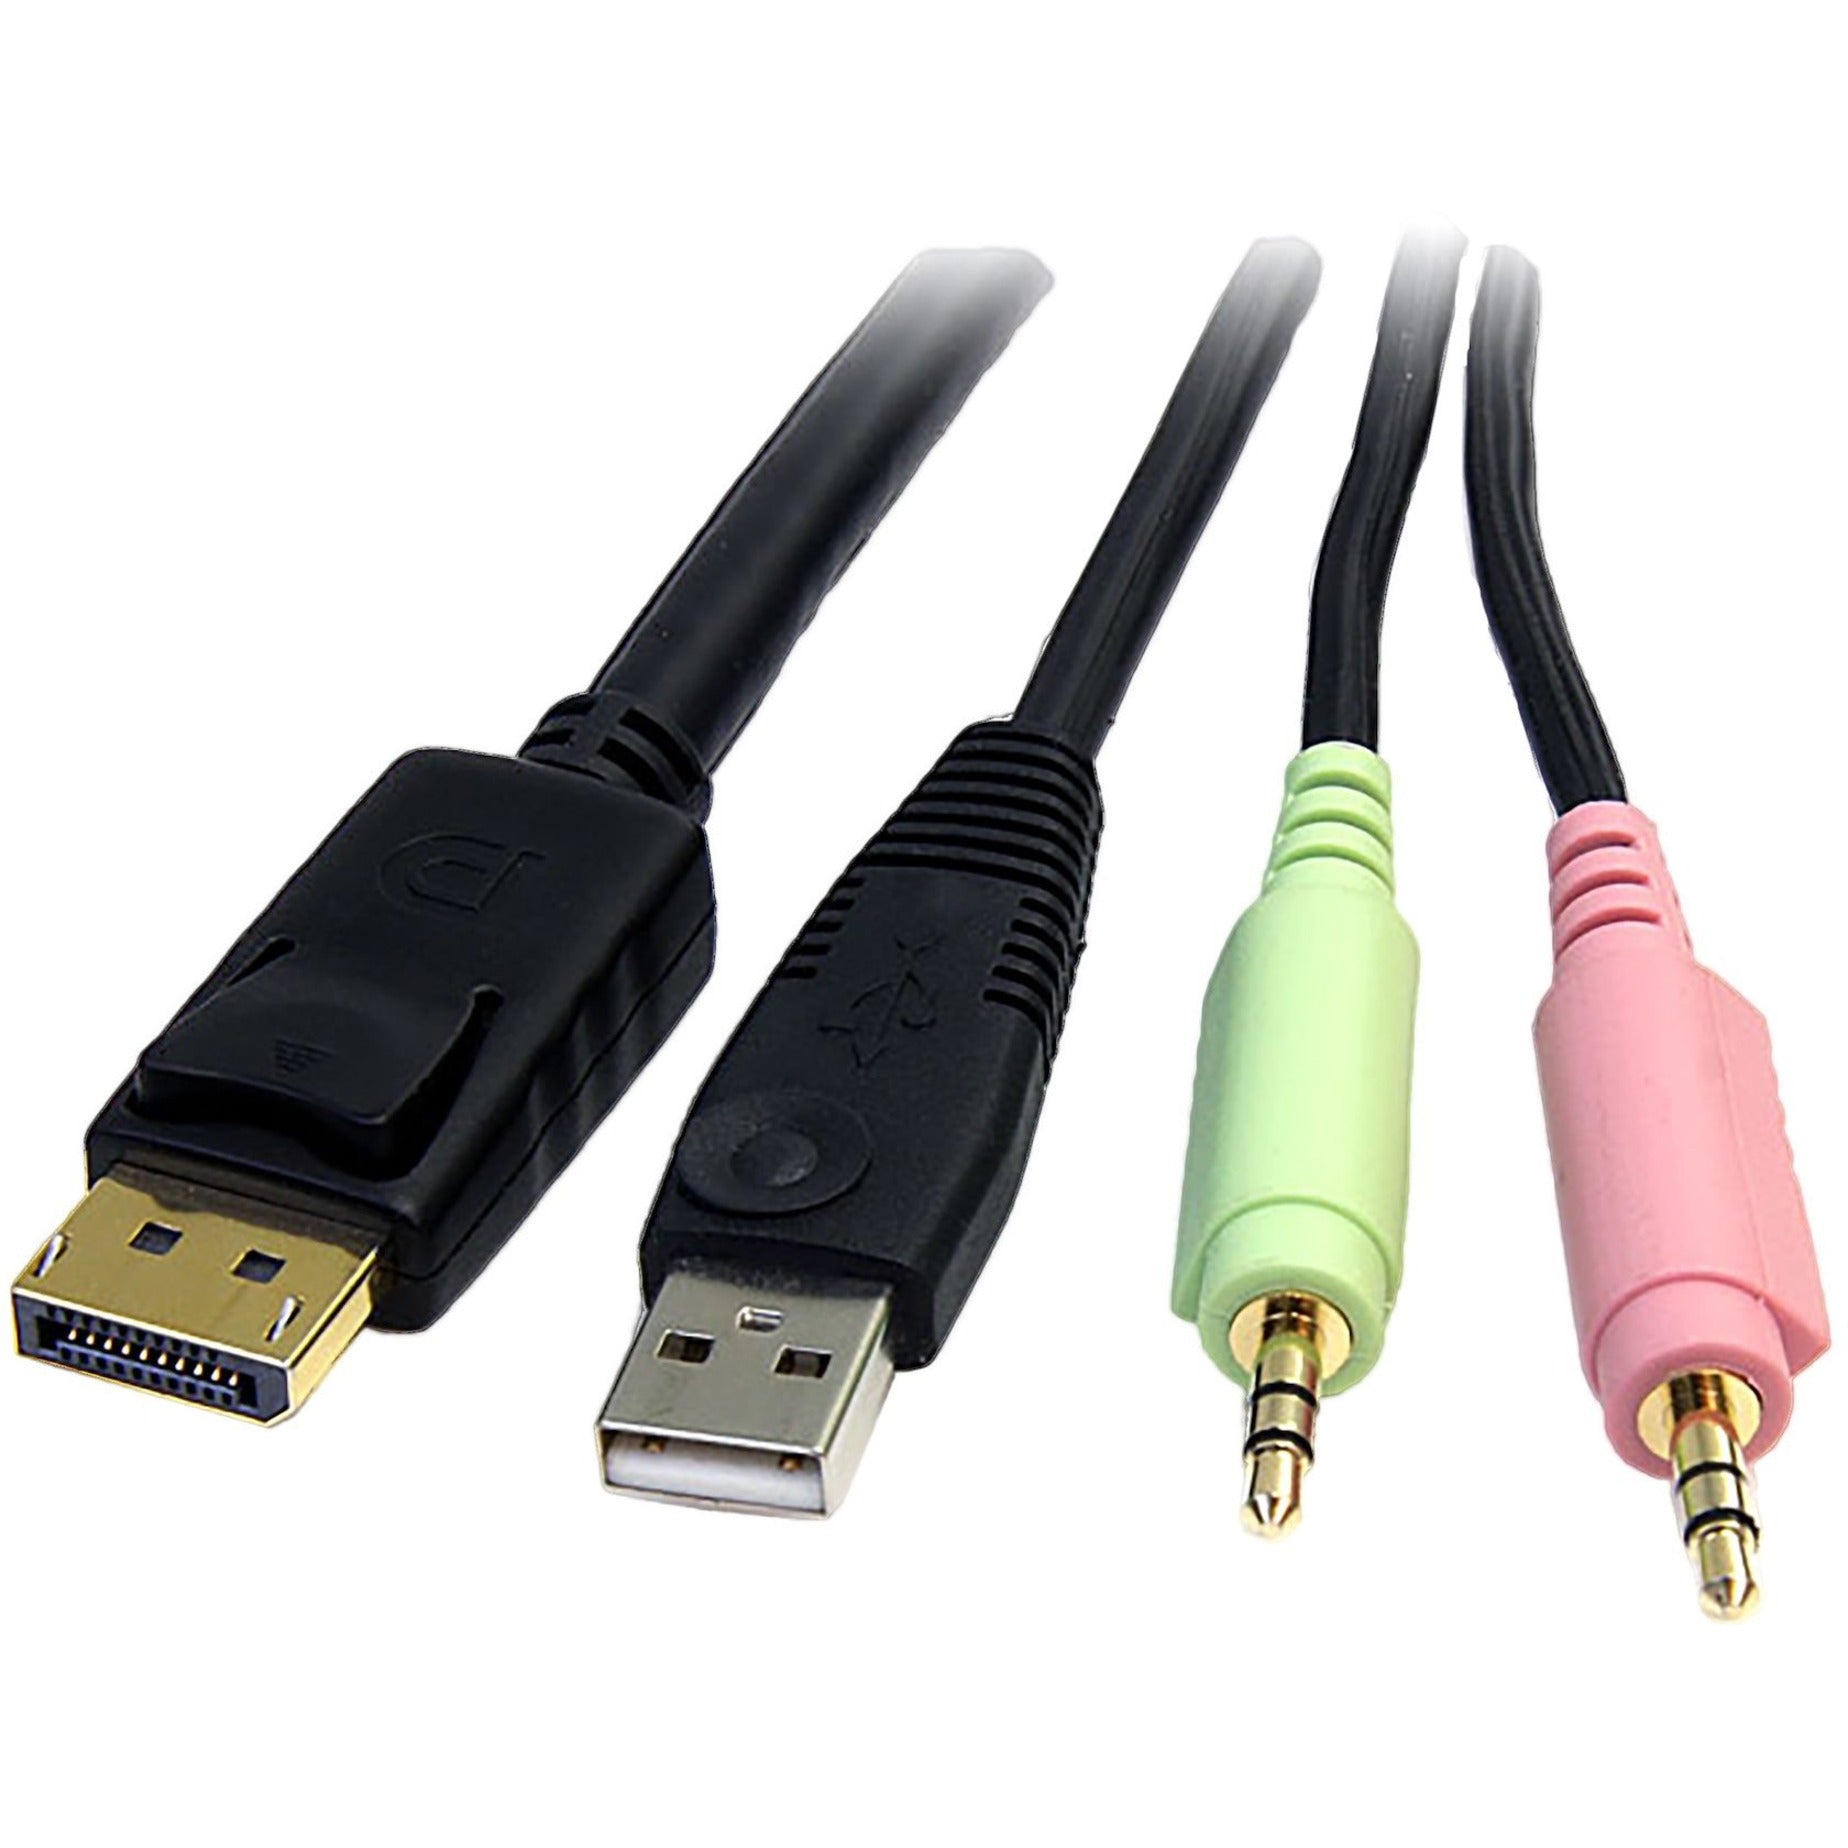 StarTech.com DP4N1USB6 6 ft 4-in-1 USB DisplayPort KVM Switch Cable Molded Strain Relief Gold Plated Connectors スター テック ドット コム DP4N1USB6 6 フィート 4-in-1 USB ディスプレイポート KVM スイッチ ケーブル、成形、ストレイン リリーフ、金メッキコネクタ